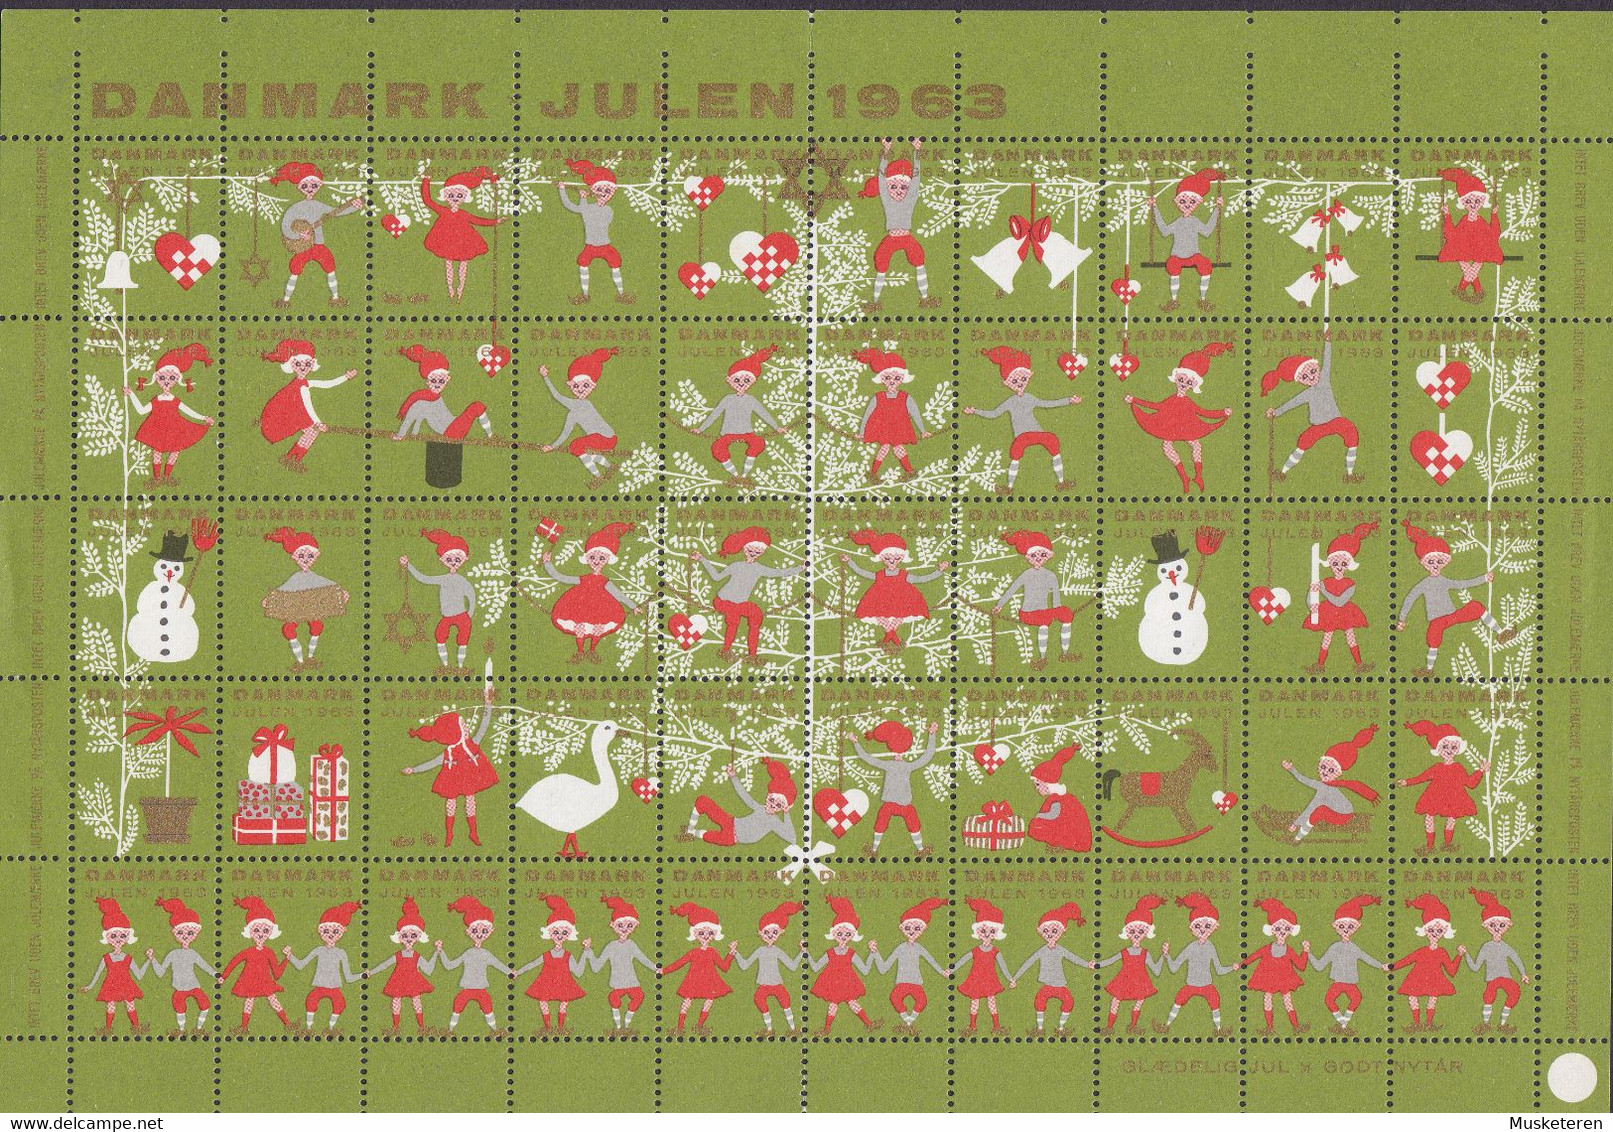 Denmark Christmas Seal Full Sheet 1963 ERROR Variety 'Missing Perf. In Top Row', MNH** - Feuilles Complètes Et Multiples